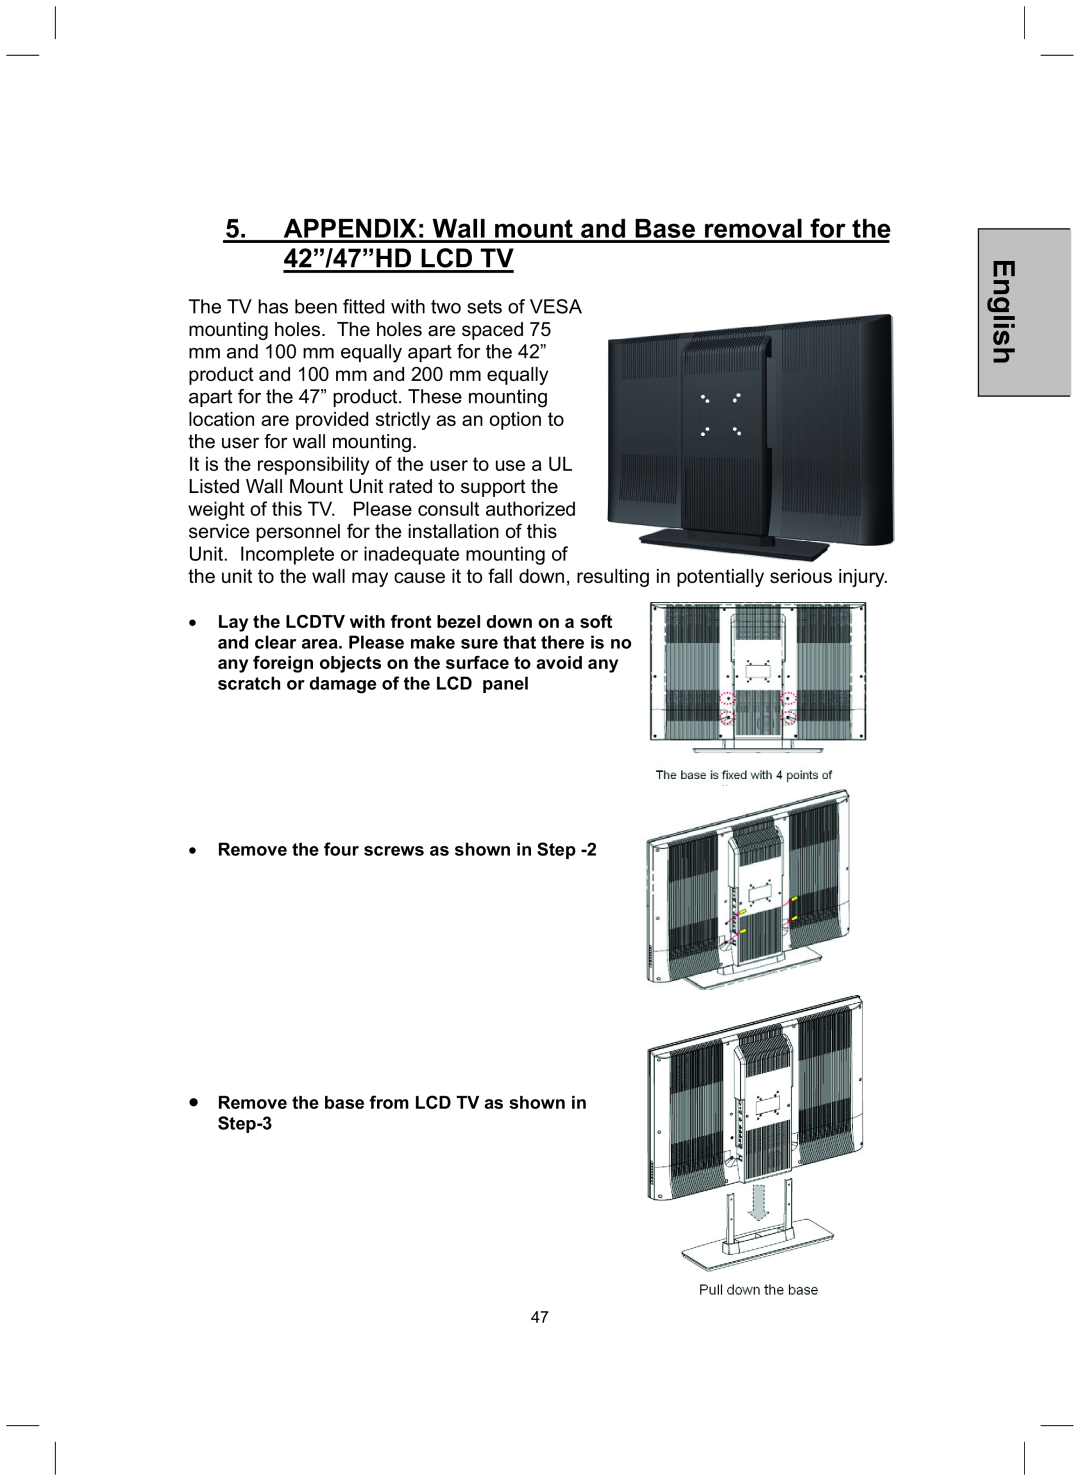 Westinghouse TX-52H480S user manual APPENDIX Wall mount and Base removal for the 42”/47”HD LCD TV, English 